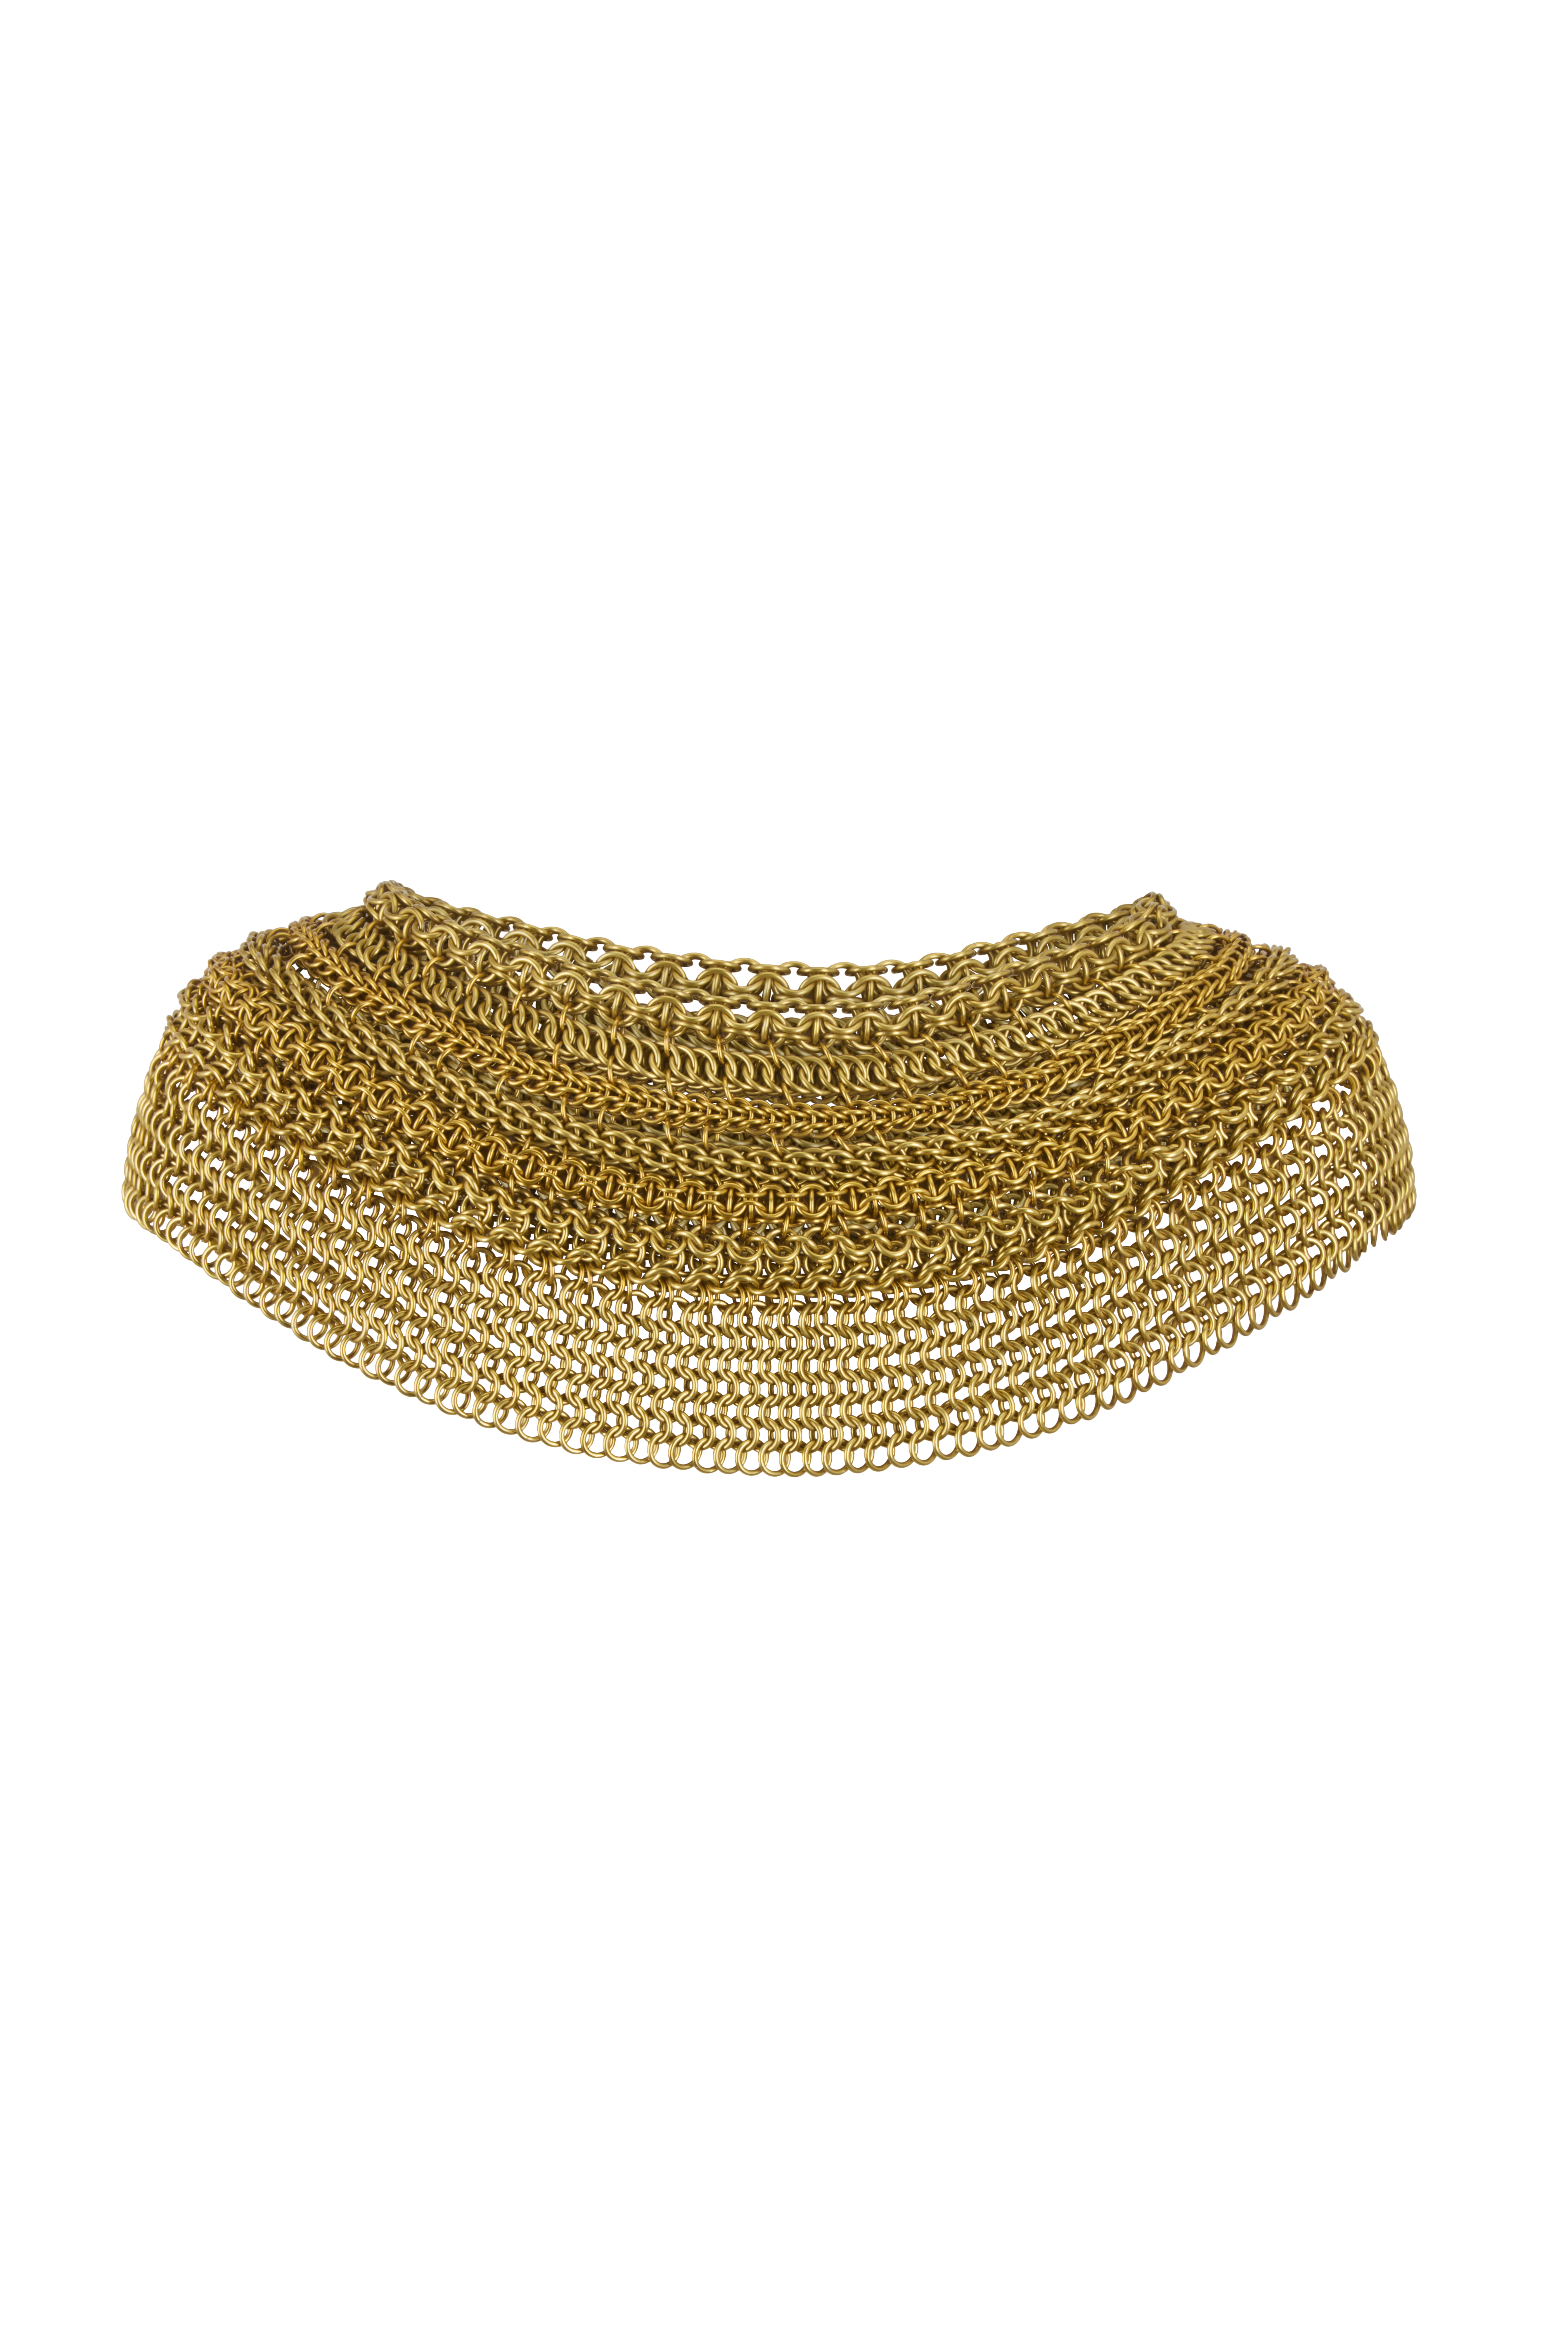 The Free Maison gold Hanover Mane, which is a circular shape of connected chains that drapes over the shoulders